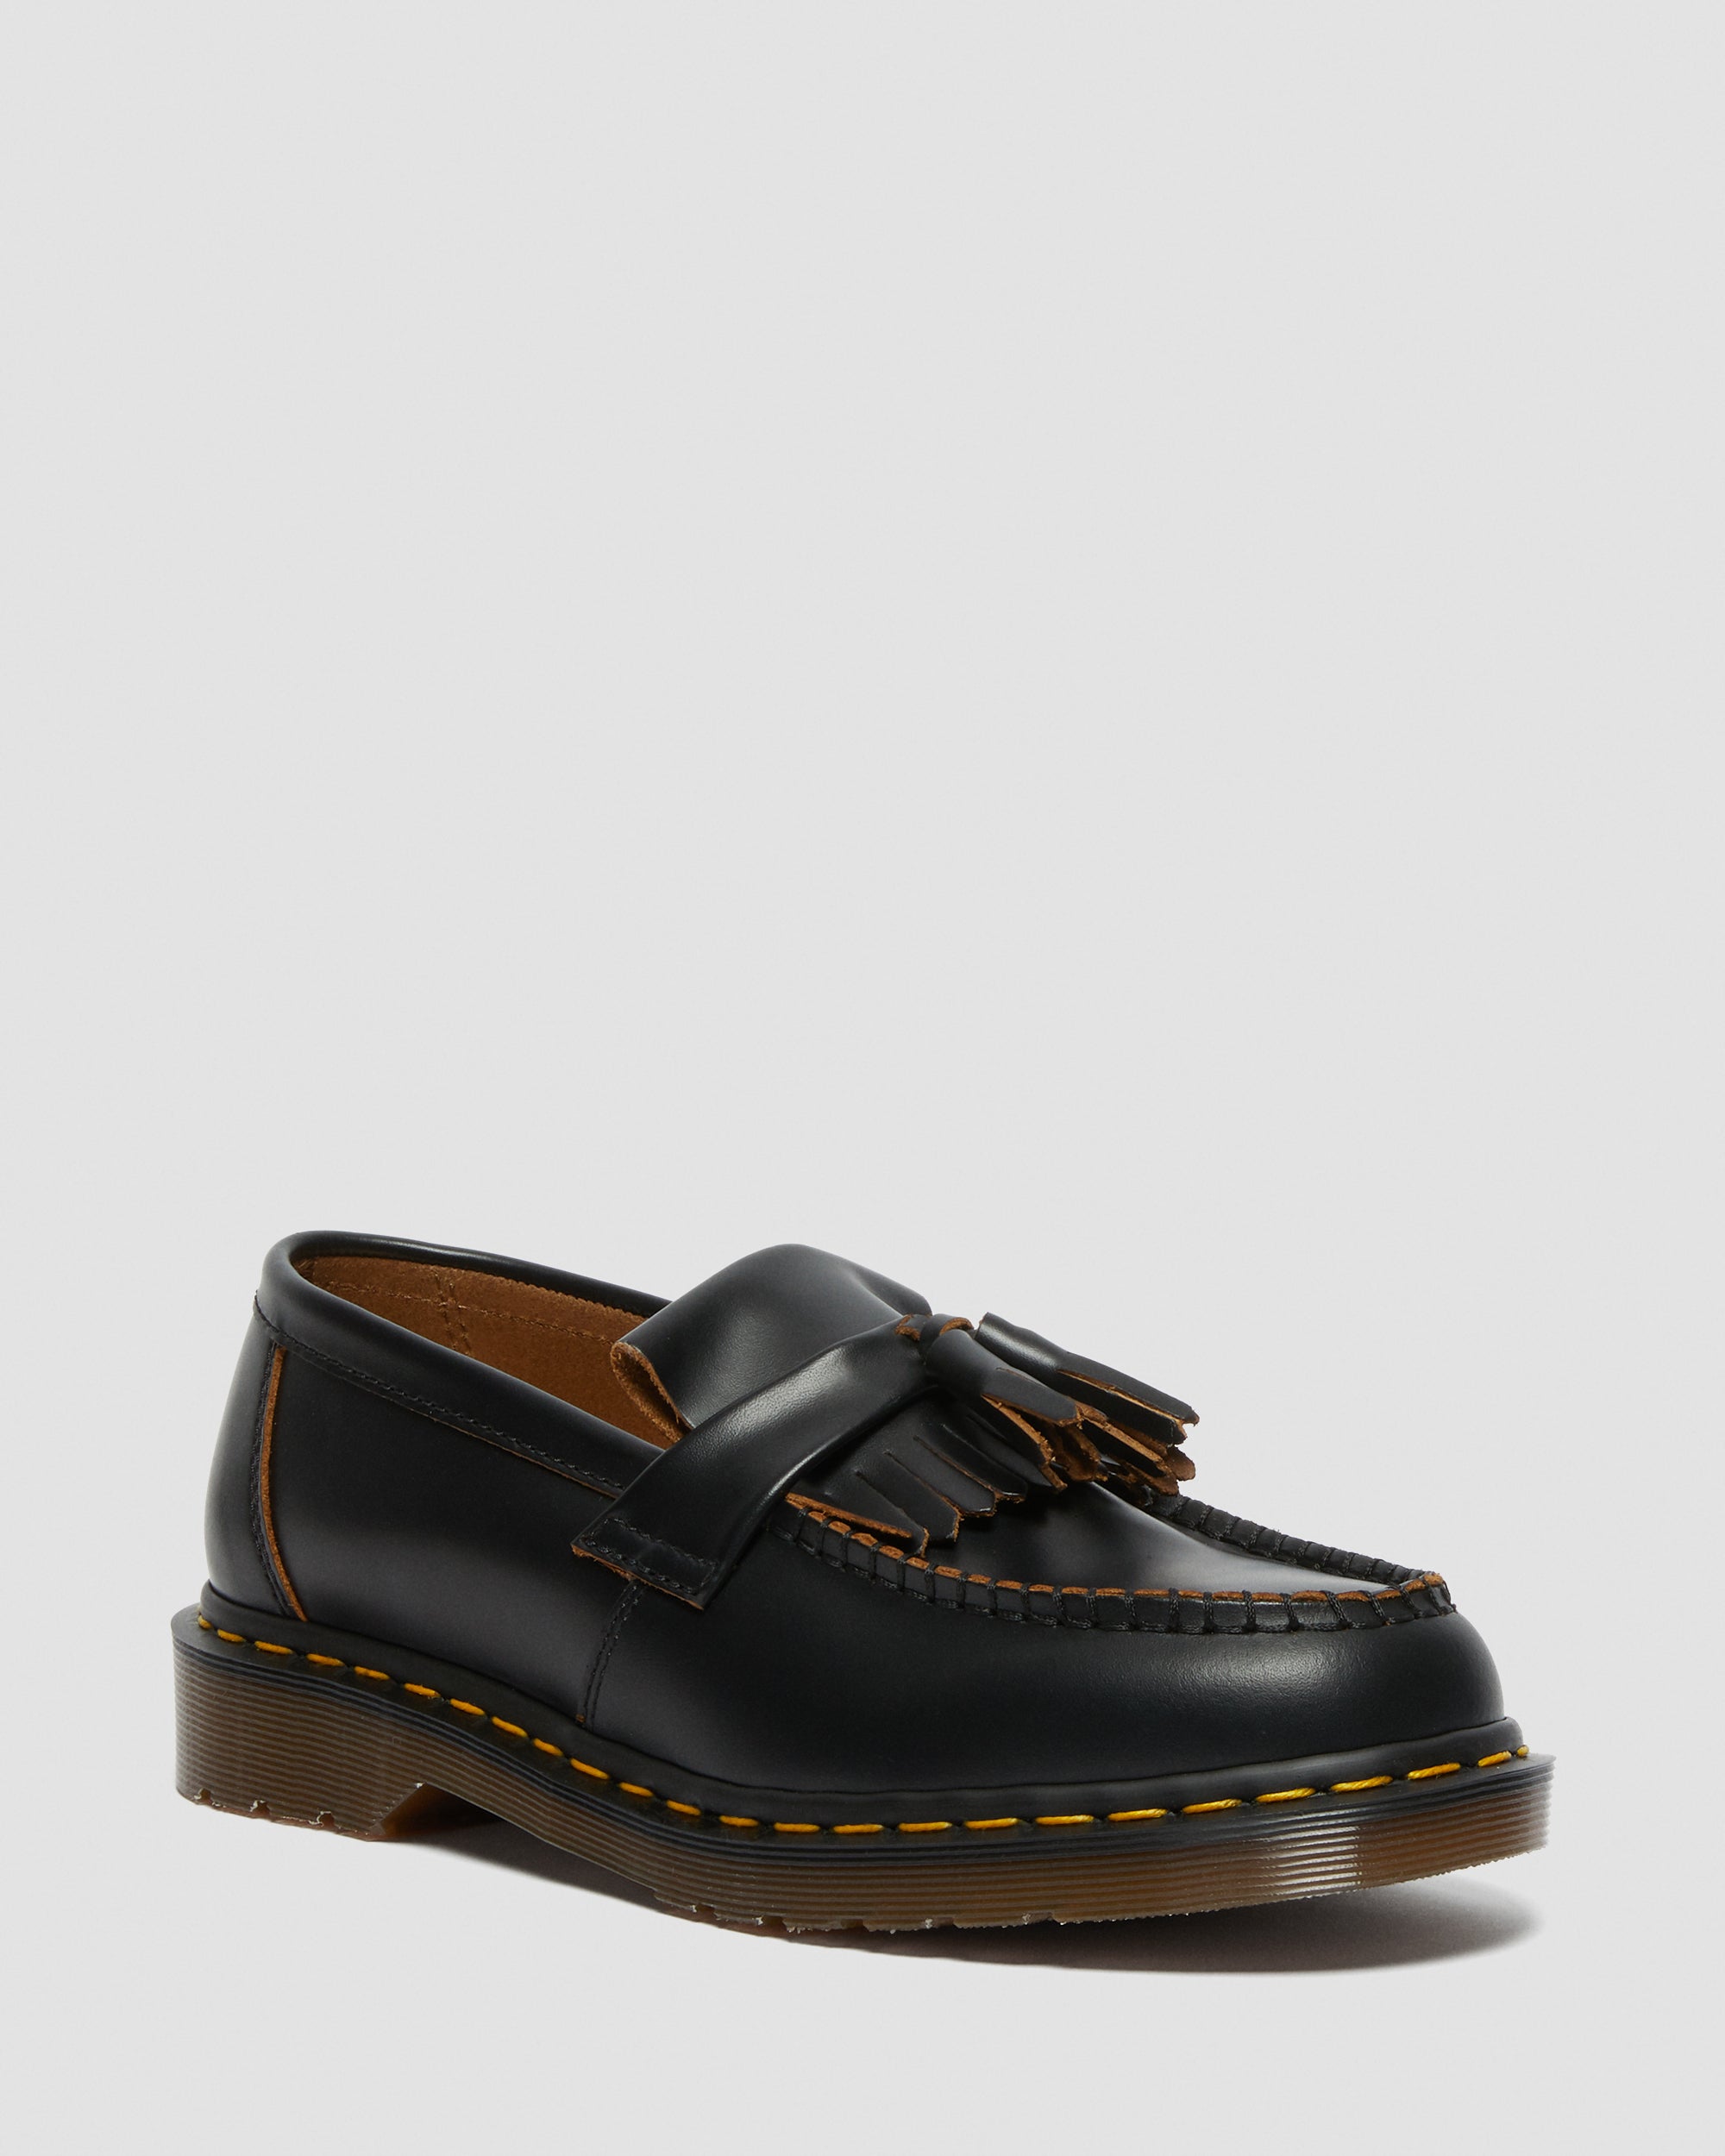 Men's Made in England | Boots, Shoes & Sandals | Dr. Martens Hong Kong